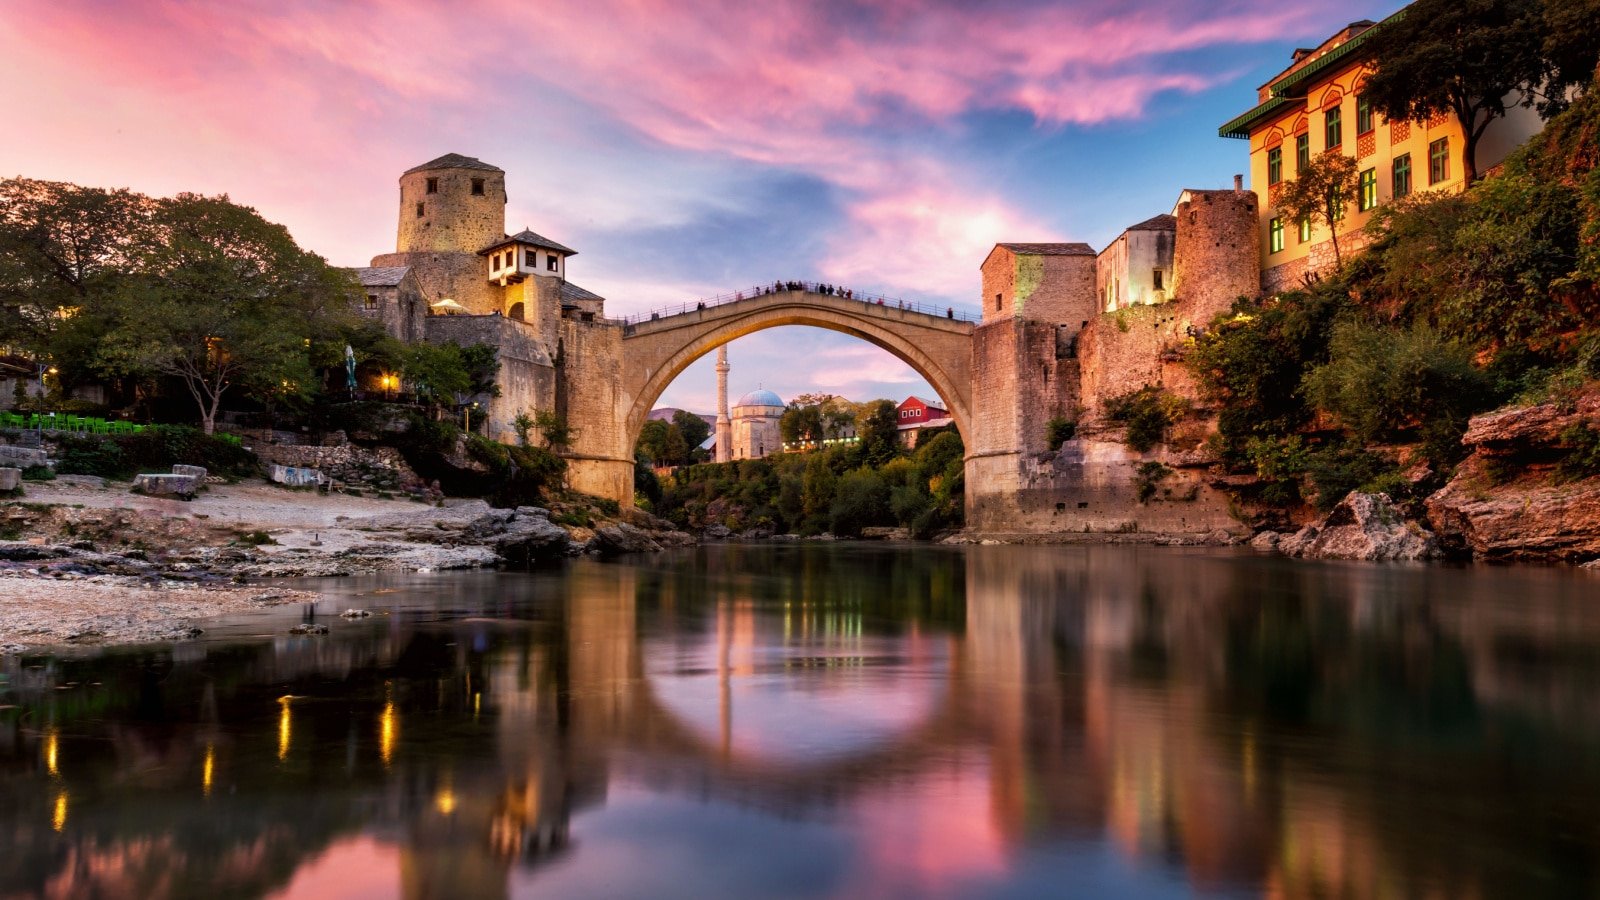 <p>It might be the most photographed attraction in the country, but Mostar's Stari Most (Old Bridge) is more than just a bridge. The original stood for 427 years before being obliterated during the war, only to rise from the ashes in 2004. The bridge defies structural logic, is jaw-dropping in its beauty, and is arguably the great symbol of Bosnia and Herzegovina.</p>